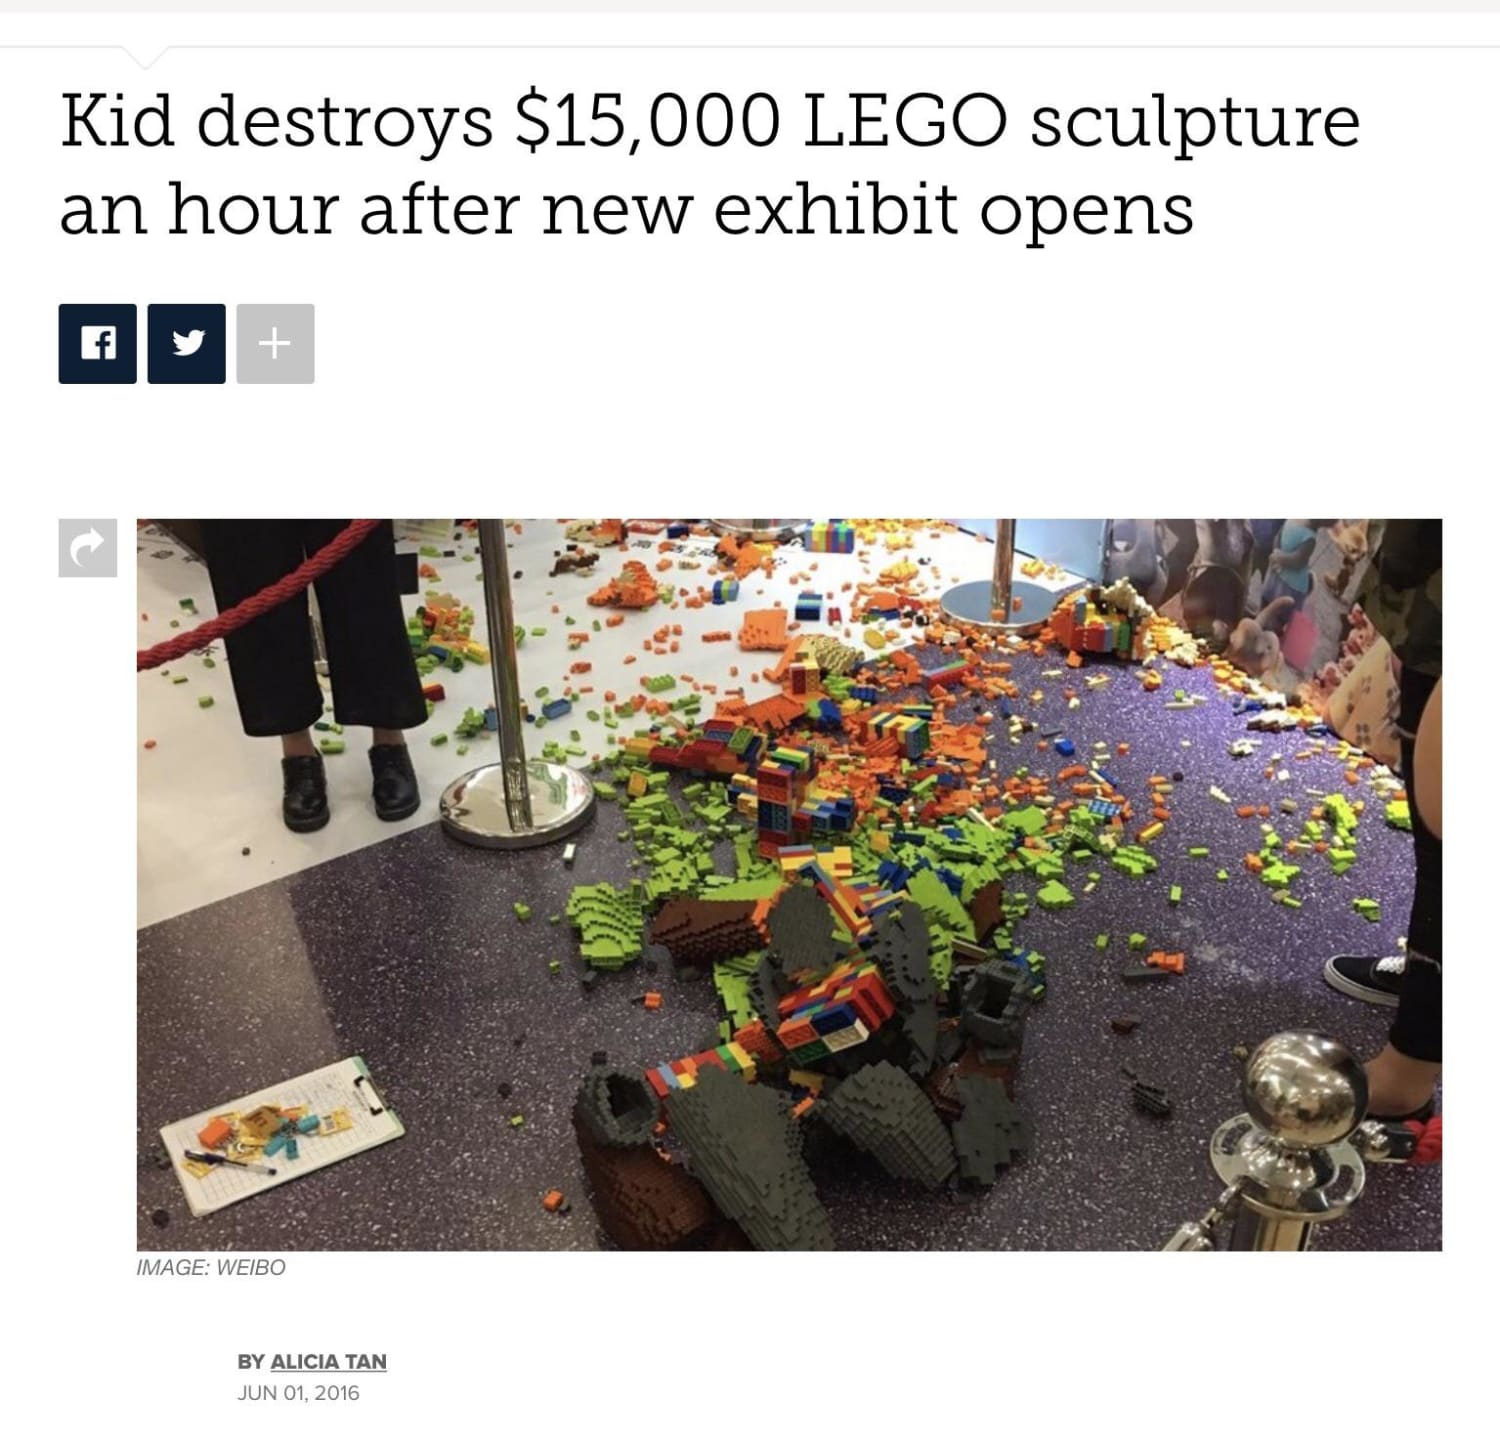 This would really hurt for profesional lego builders